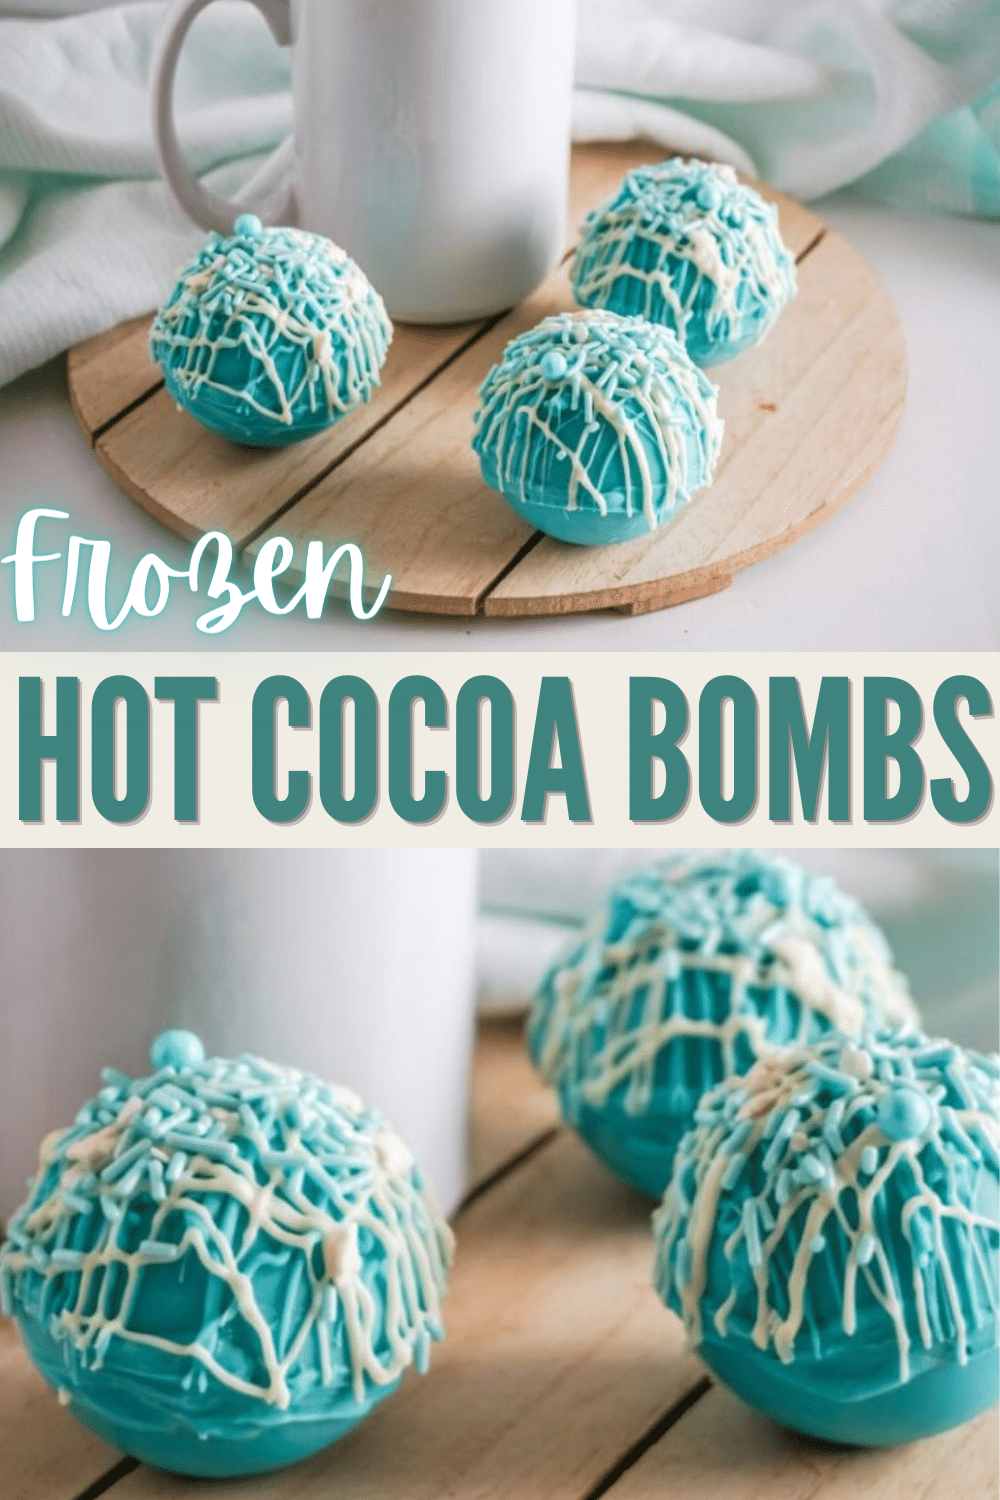 These Frozen Hot Cocoa Bombs are so simple to make! They use just 6 easy ingredients and are full of flavor and surprises! #frozen #hotcocoabombs #hotcocoa #dessert via @wondermomwannab